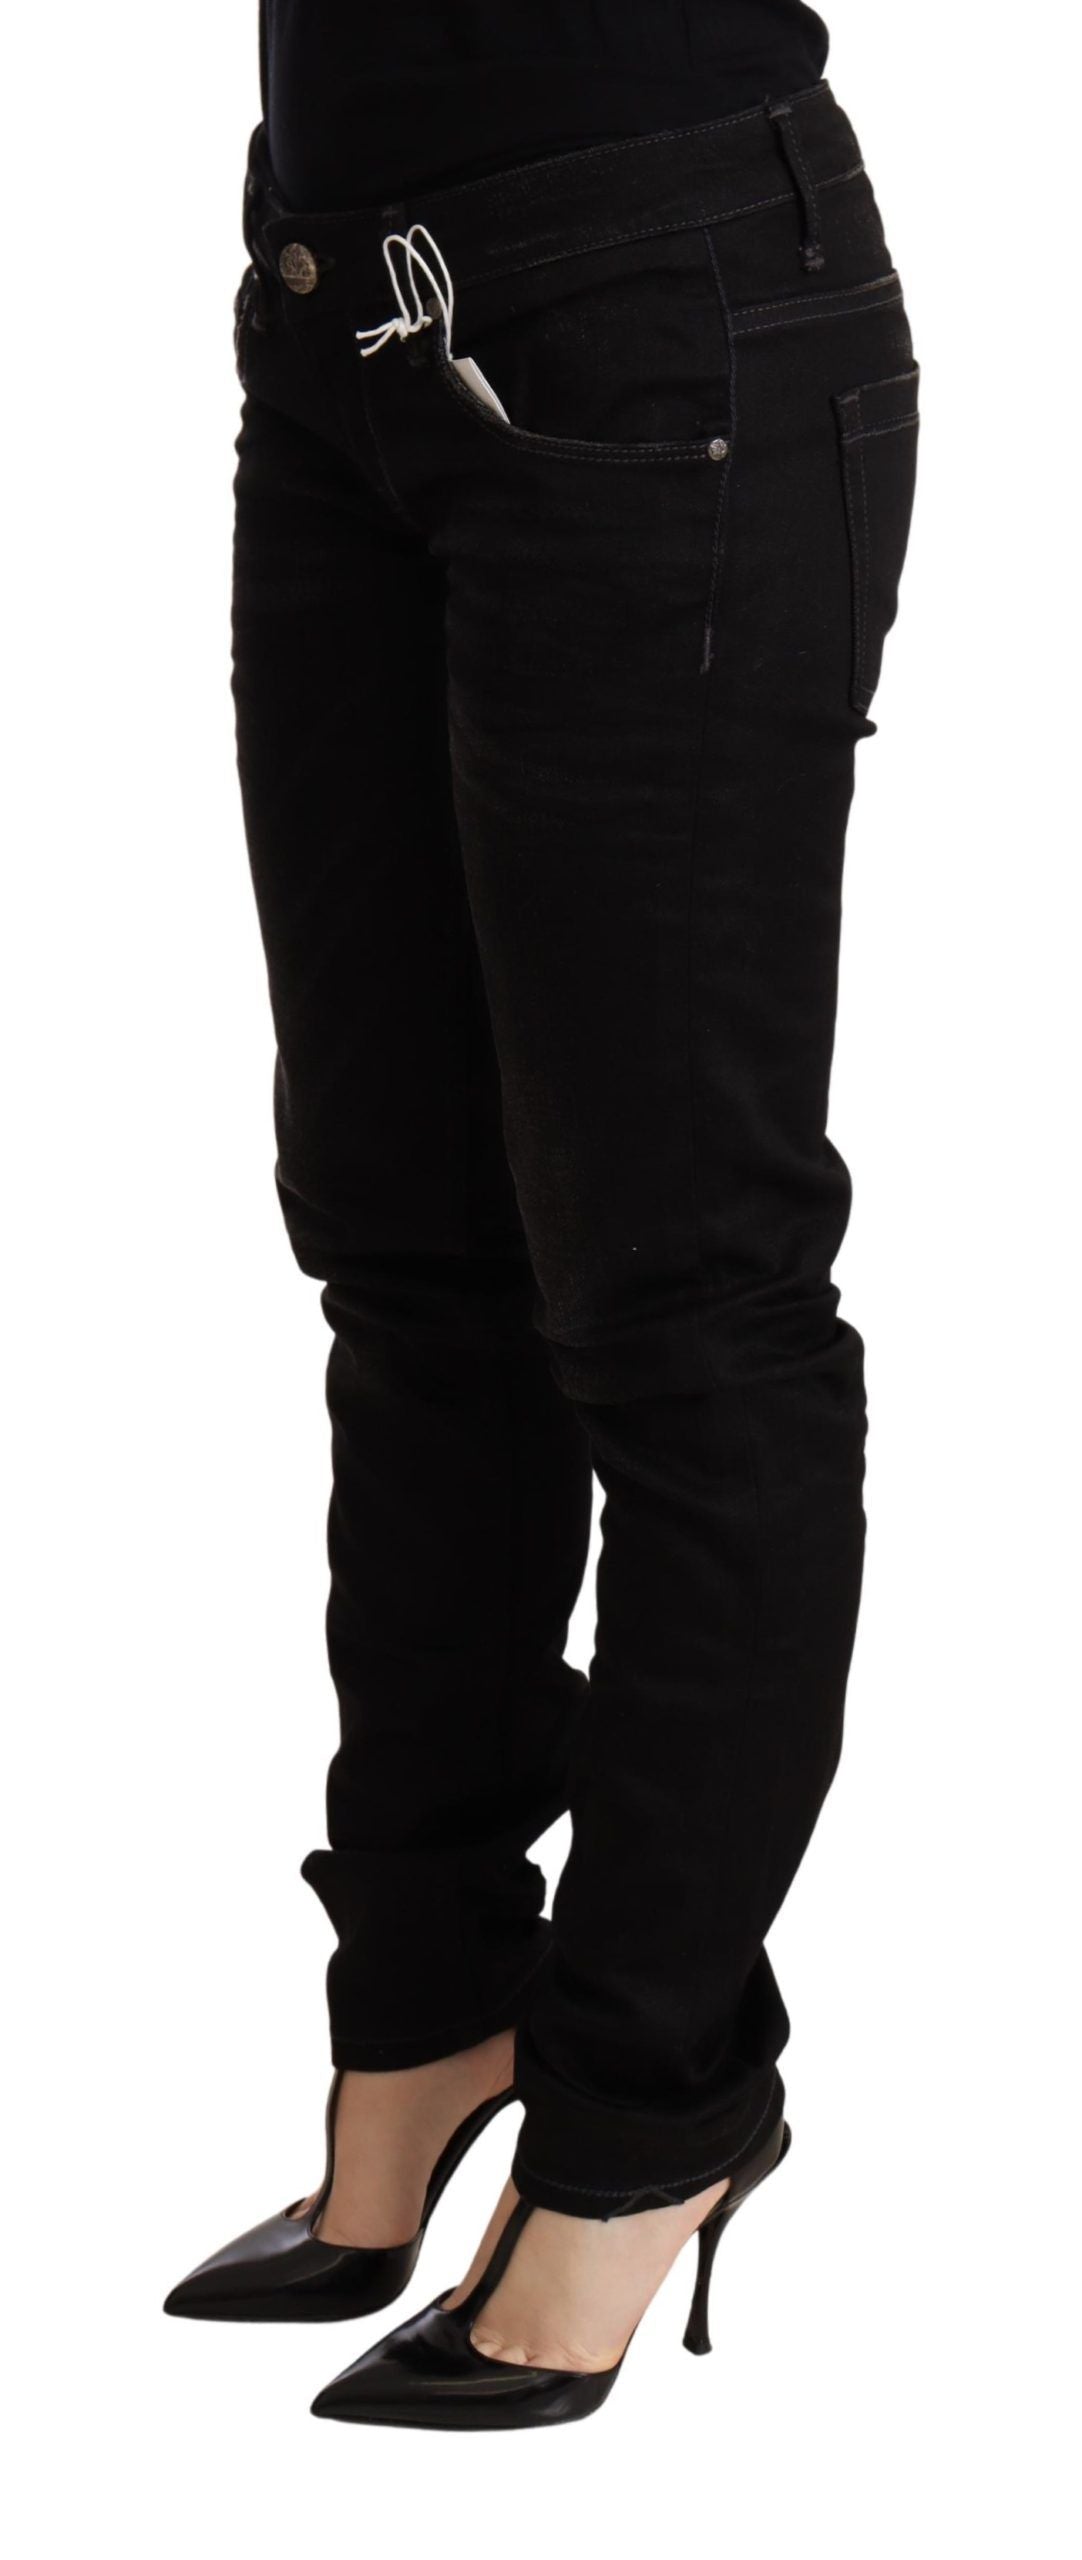 Black Low Waist Skinny Denim Cotton Trouser - Designed by Acht Available to Buy at a Discounted Price on Moon Behind The Hill Online Designer Discount Store